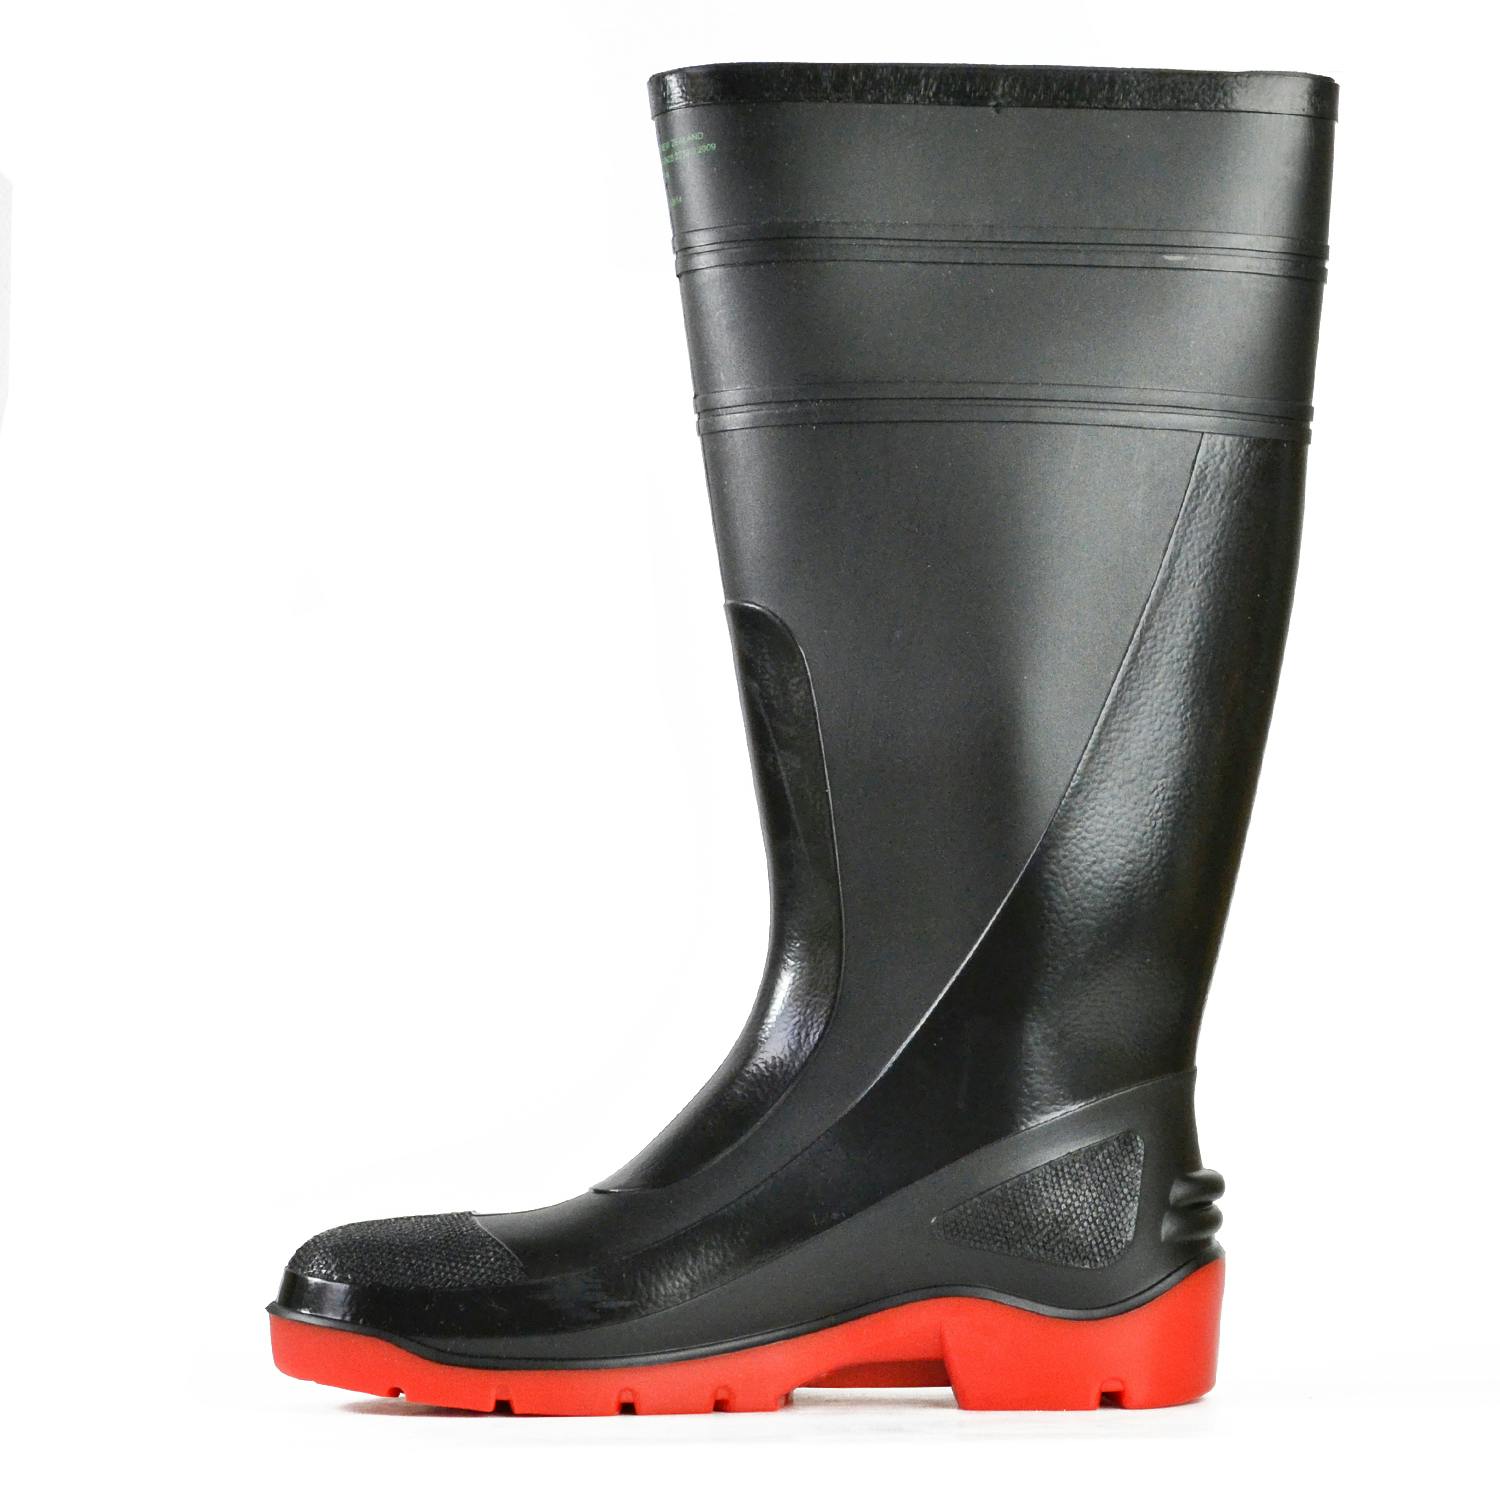 Bata Industrials Utility-ST - Black / Red PVC 400Mm Safety Toe Boot (PVC Utility)_3